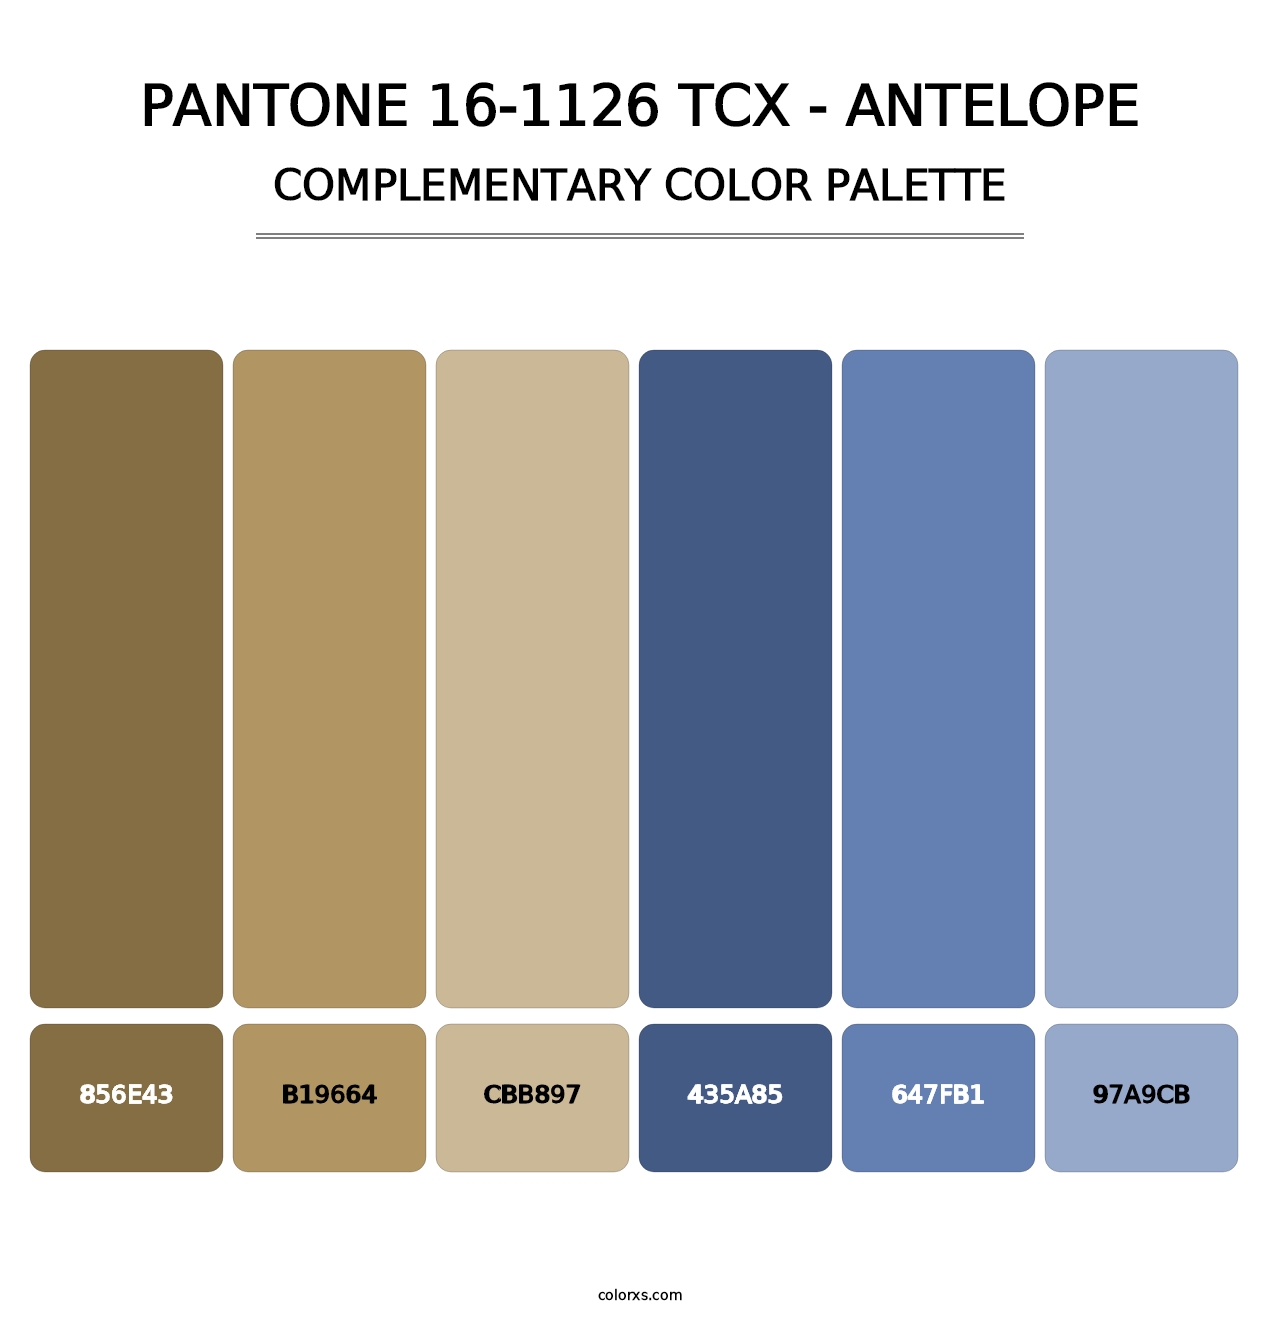 PANTONE 16-1126 TCX - Antelope - Complementary Color Palette